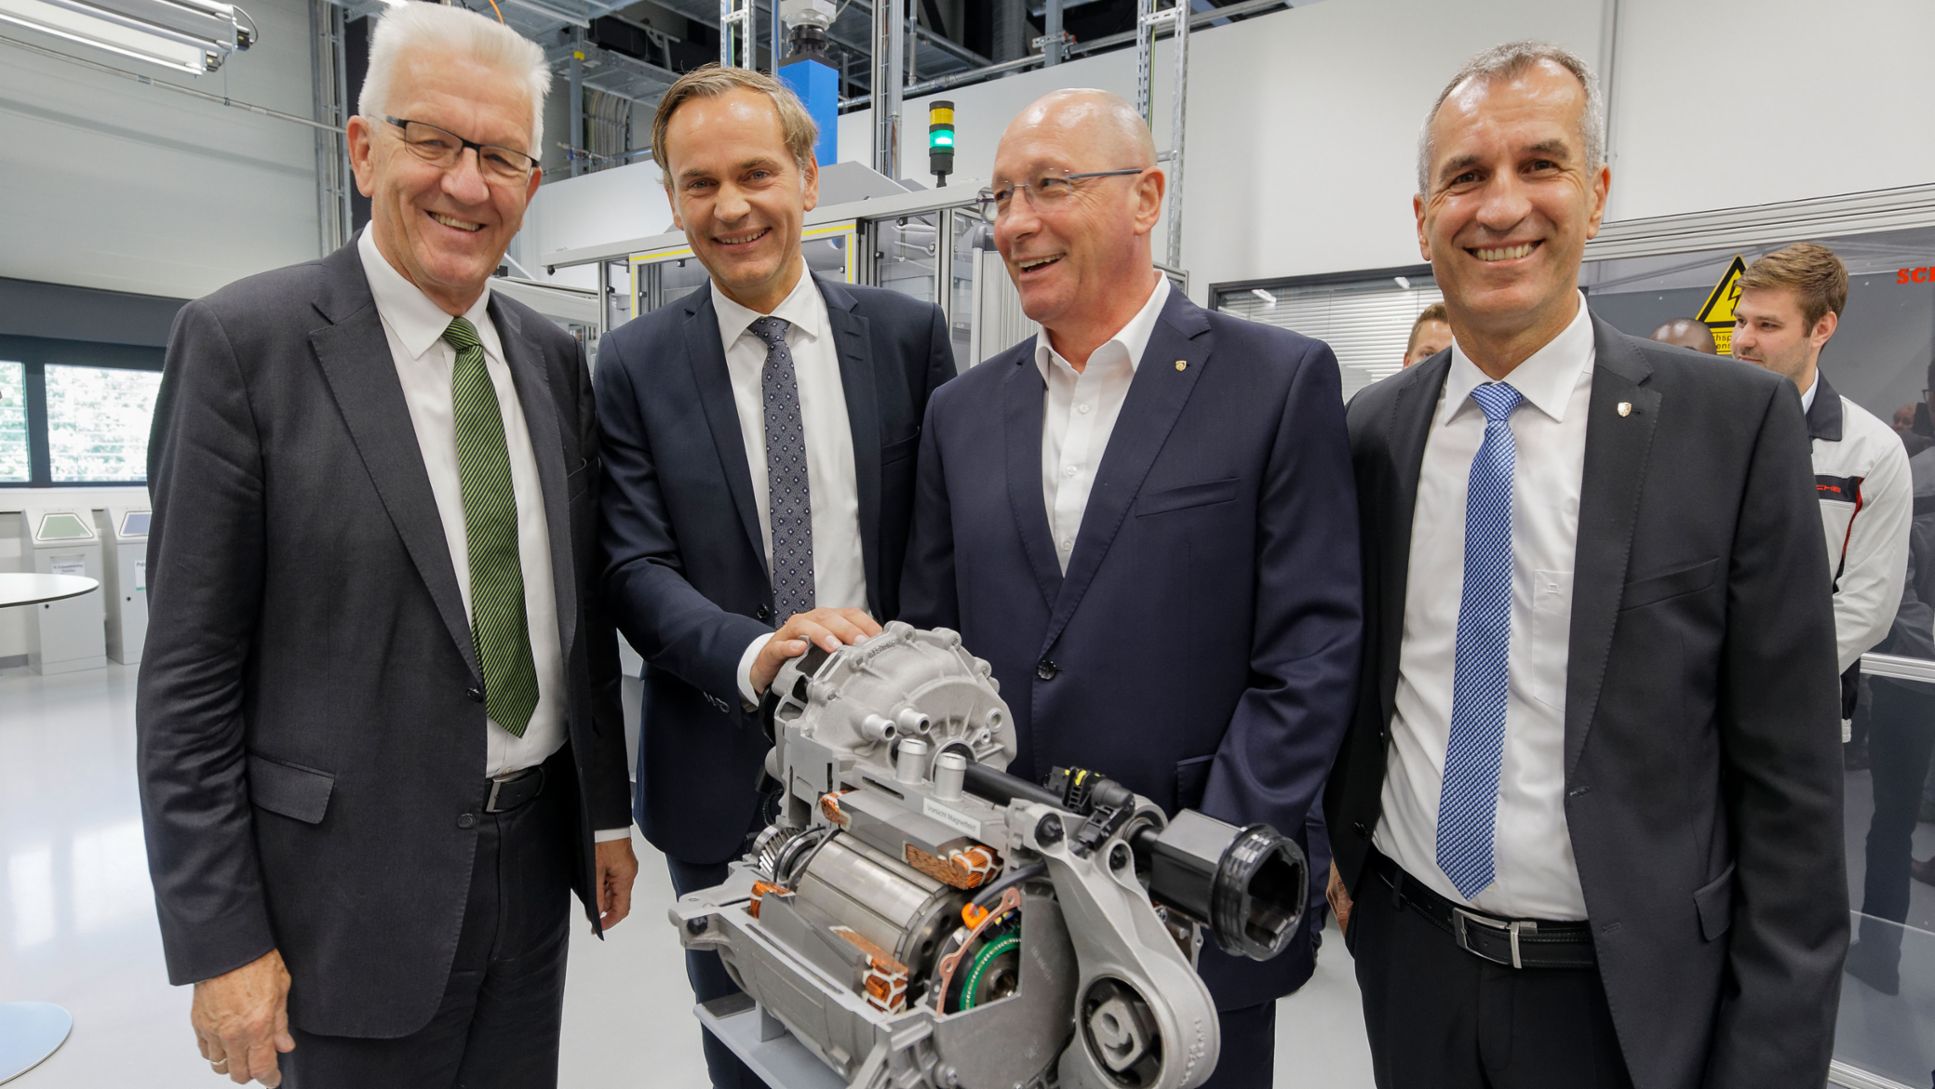 Winfried Kretschmann, Minister-President of Baden-Württemberg, Oliver Blume, Chairman of the Executive Board at Porsche, Uwe Hück, Chairman of the Group Works Council, Albrecht Reimold, Member of the Executive Board for Production and Logistics, l-r, Stuttgart, 2017, Porsche AG